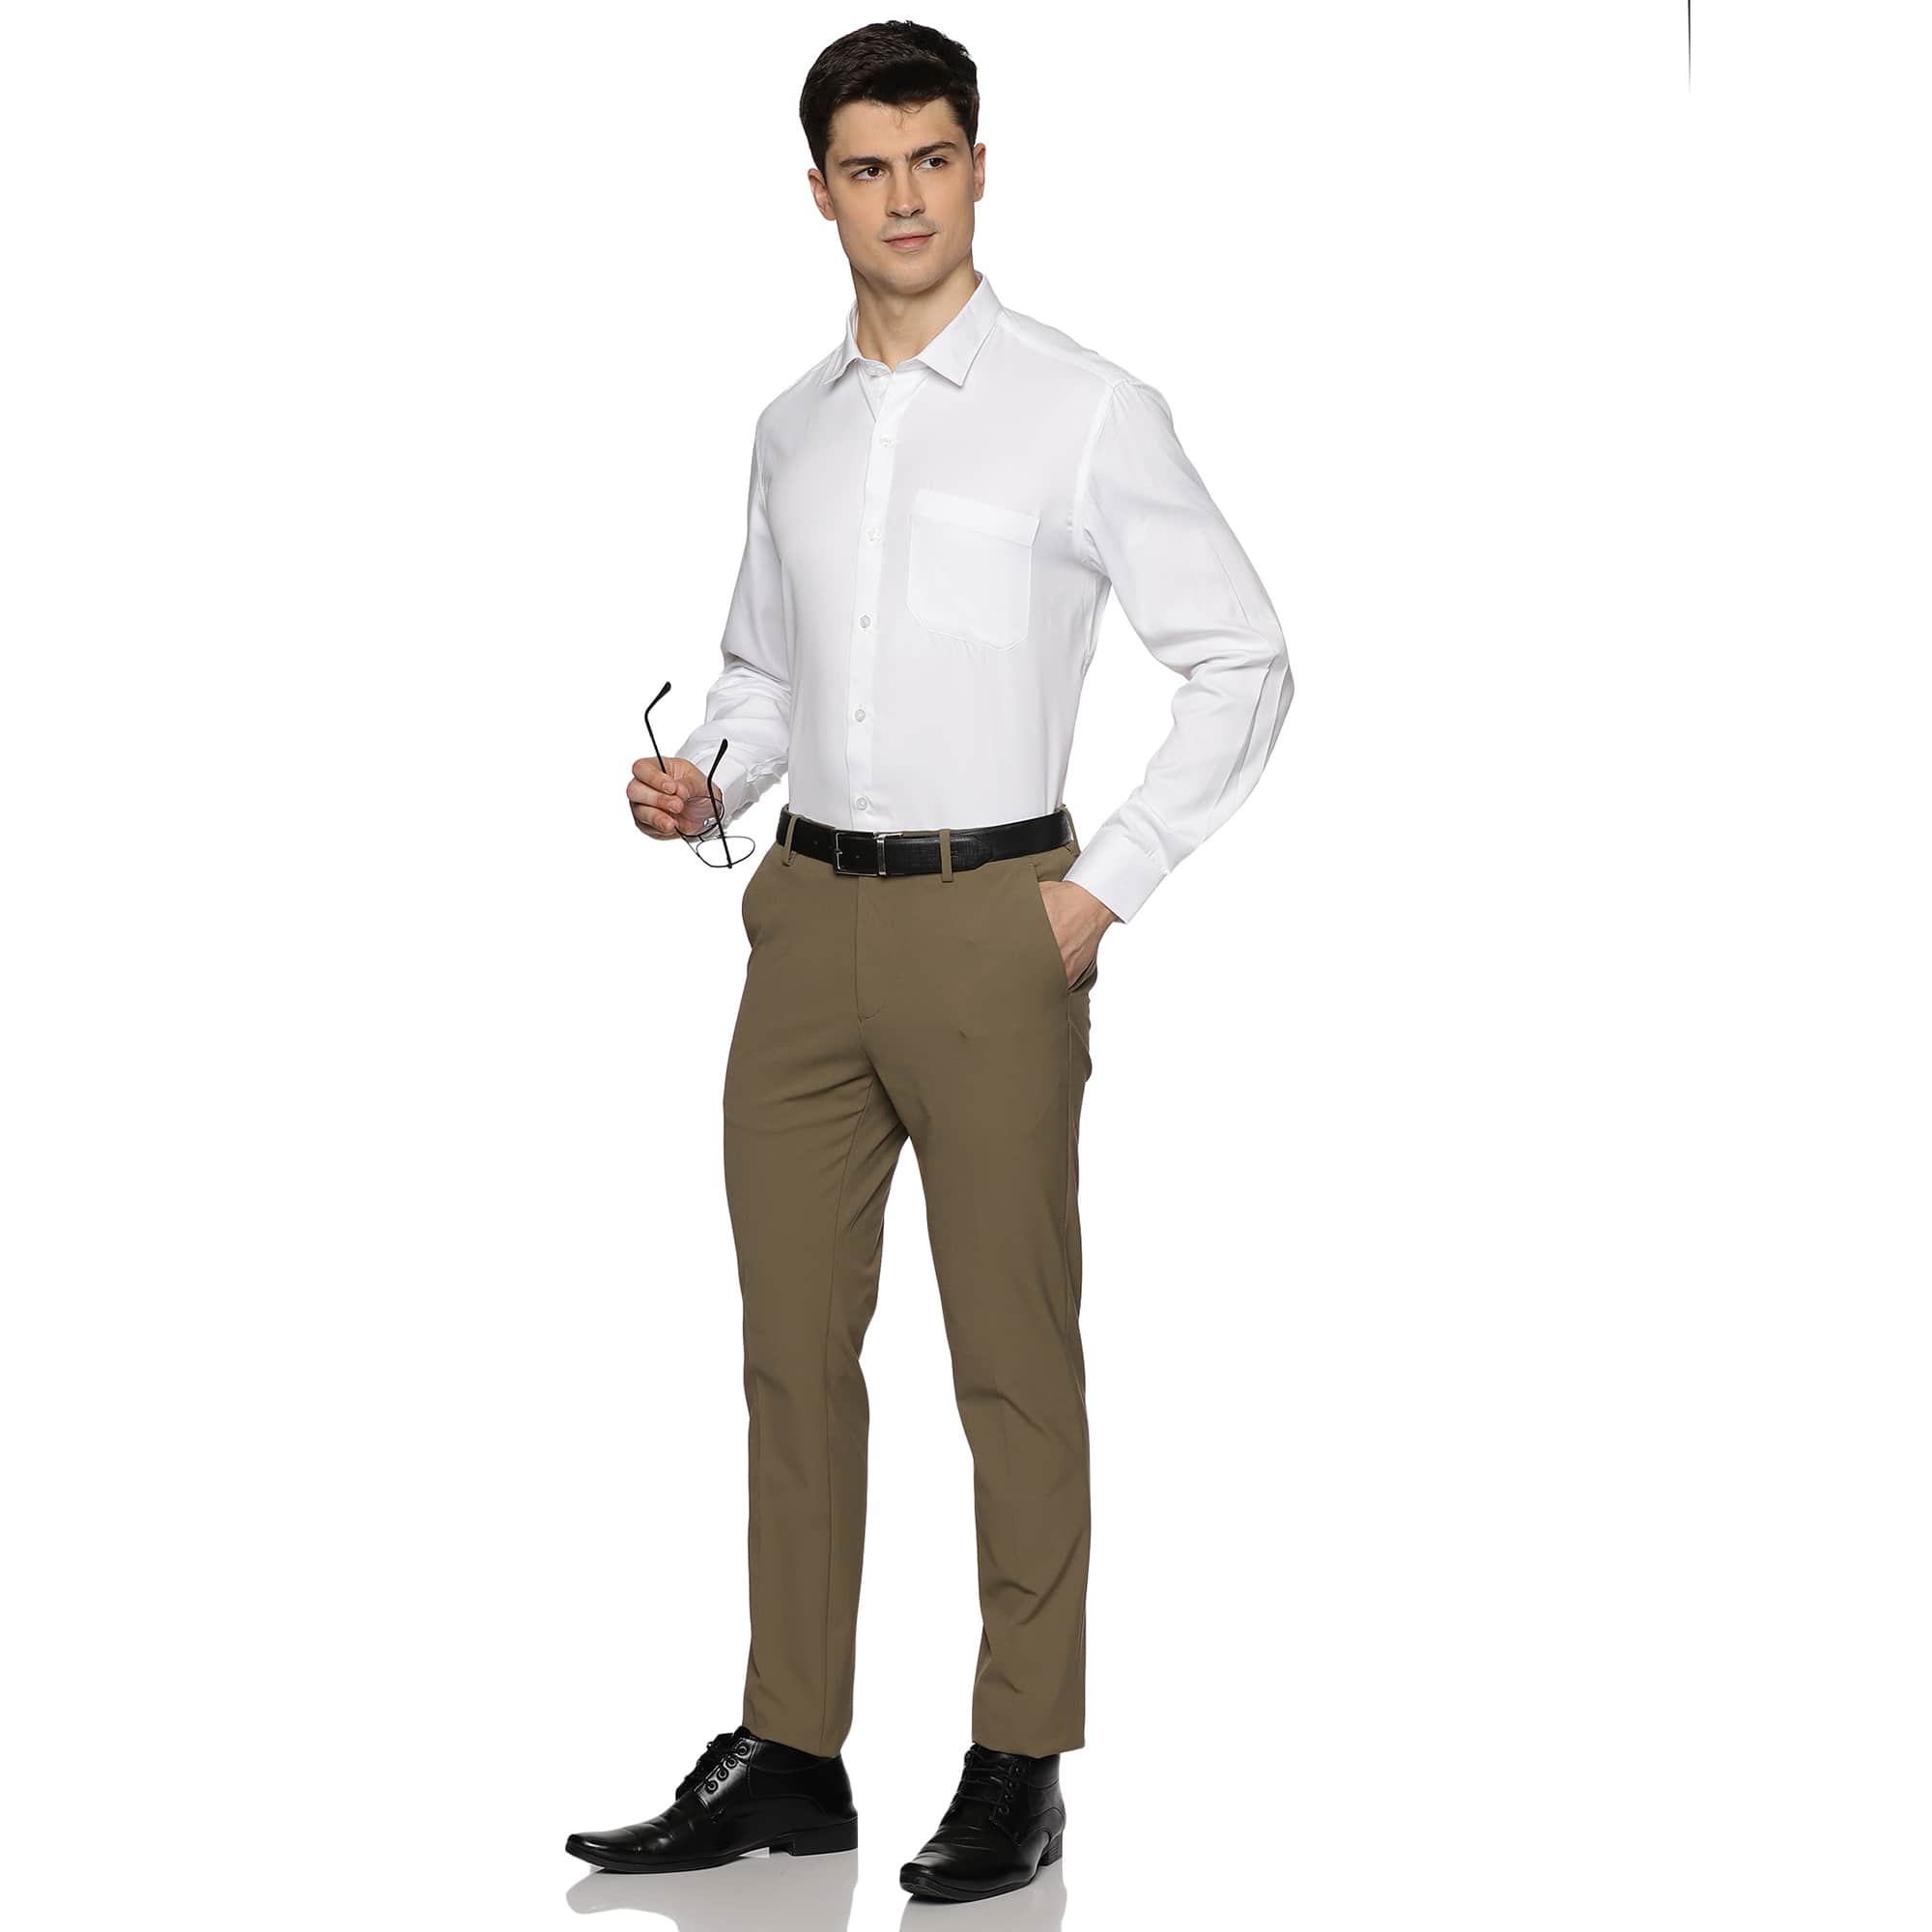 Donald Dobby Textured Shirt in White - The Formal Club